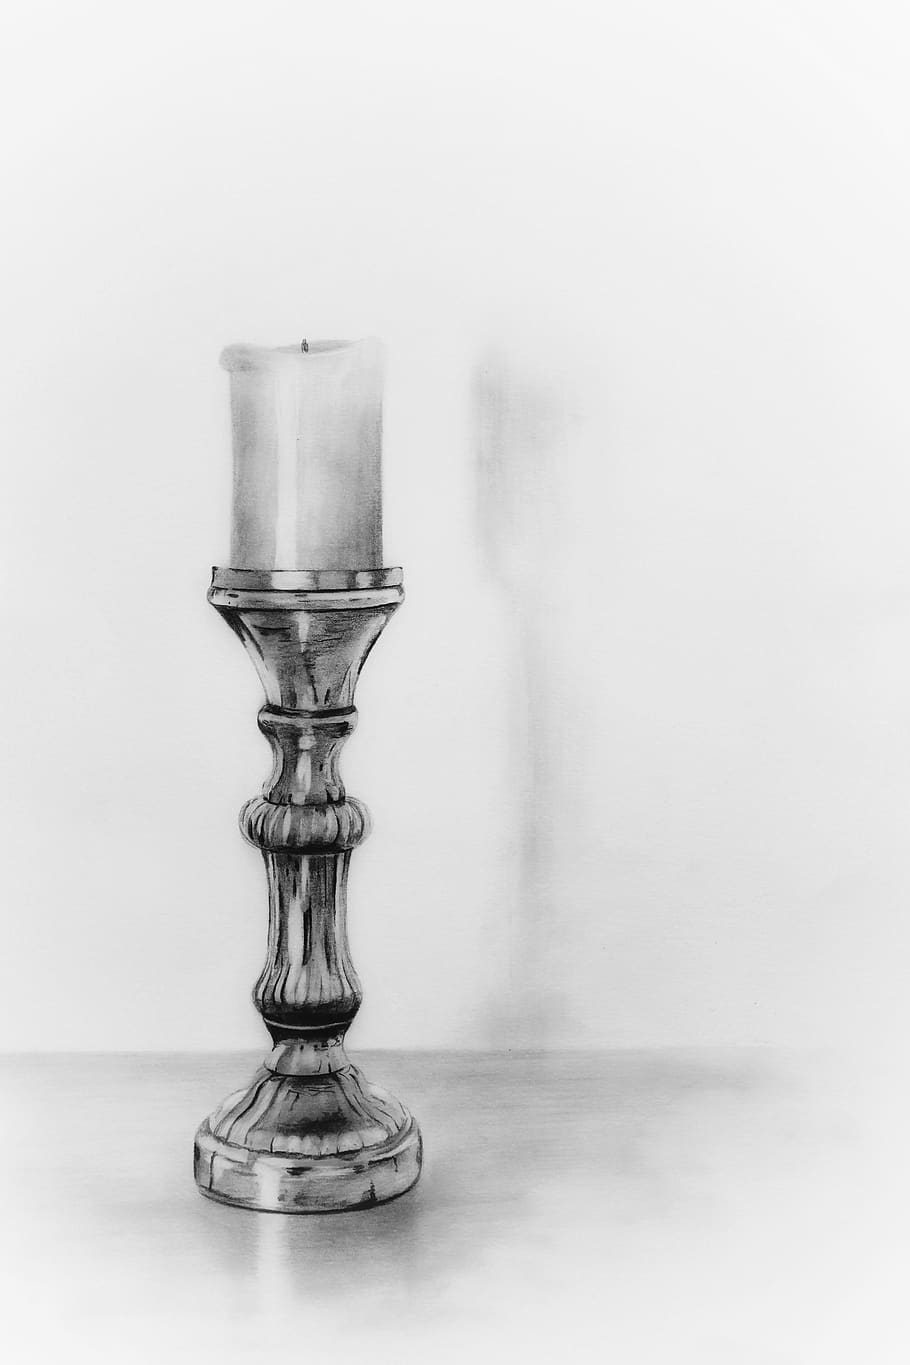 pencil drawing, pencil, candlestick, candle, graphite, art, drawing, painting, reflection, silver